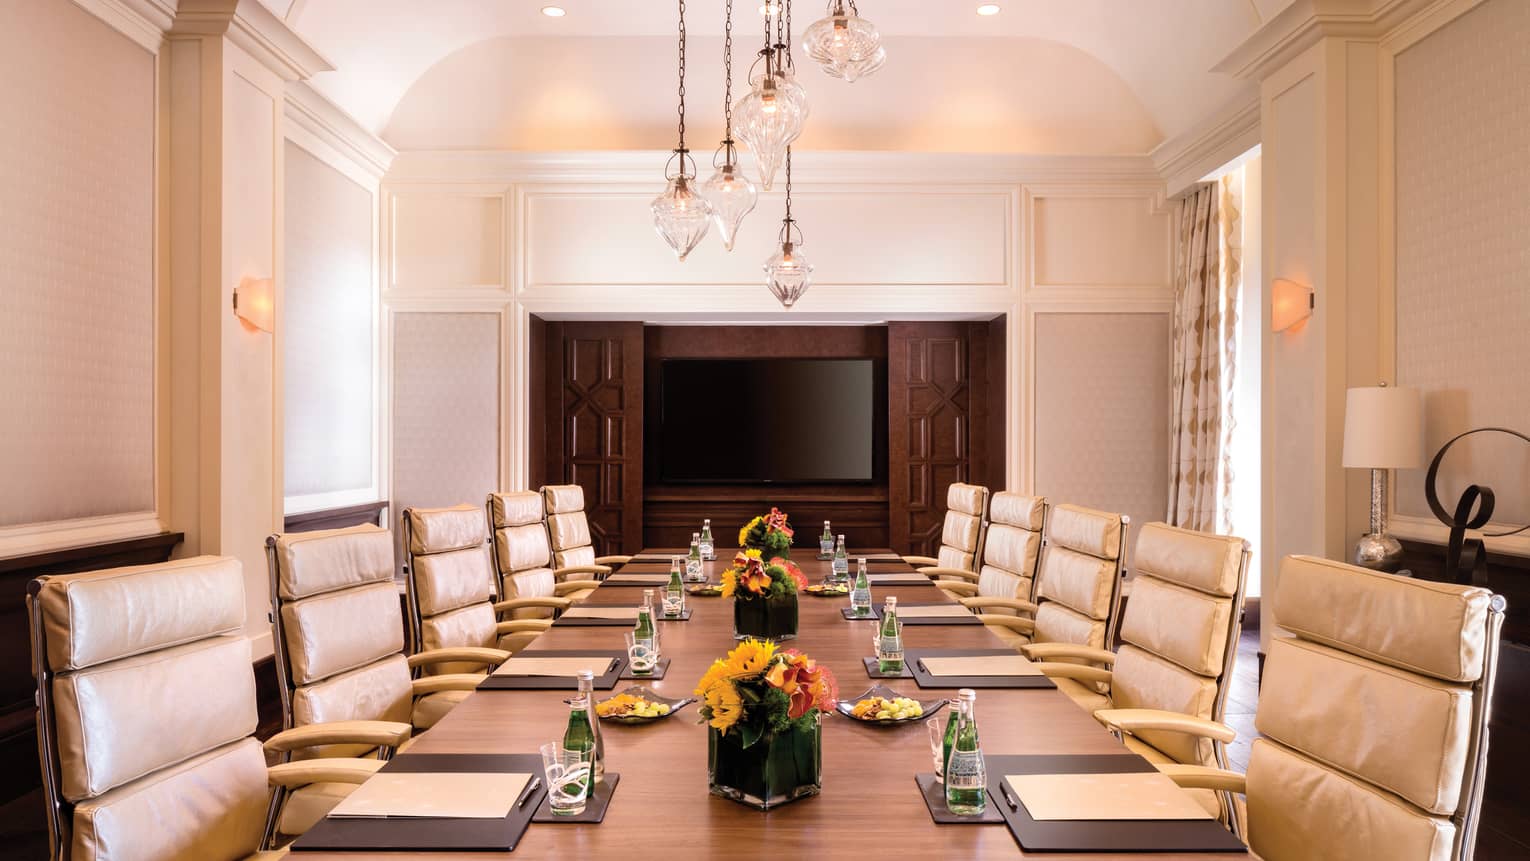 Executive Boardroom with large meeting table set with agendas and flowers, lined with tan leather chairs 